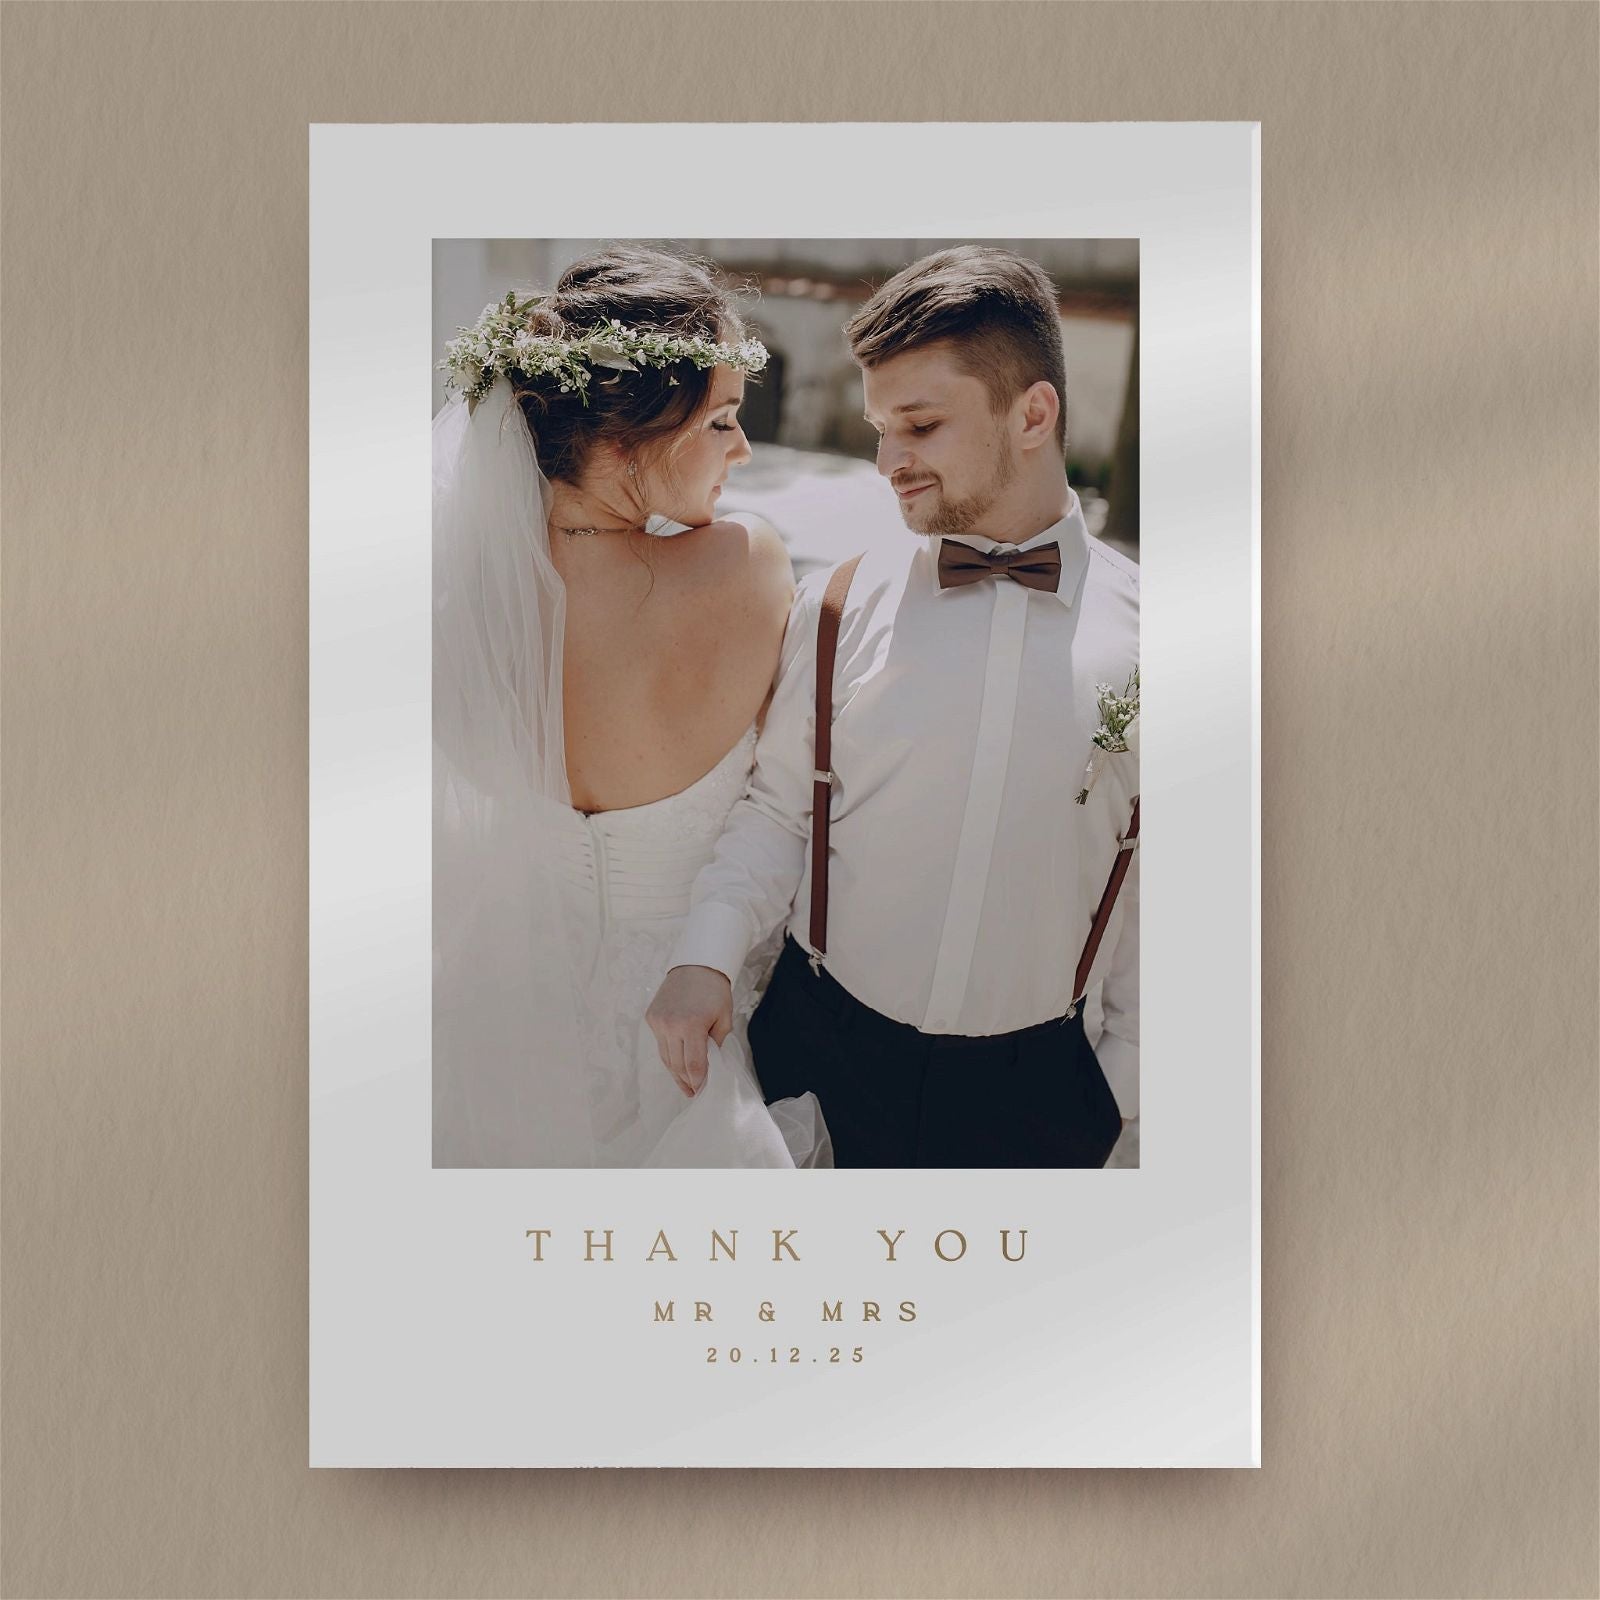 Gigi | Thank You Card With Photo  Ivy and Gold Wedding Stationery   